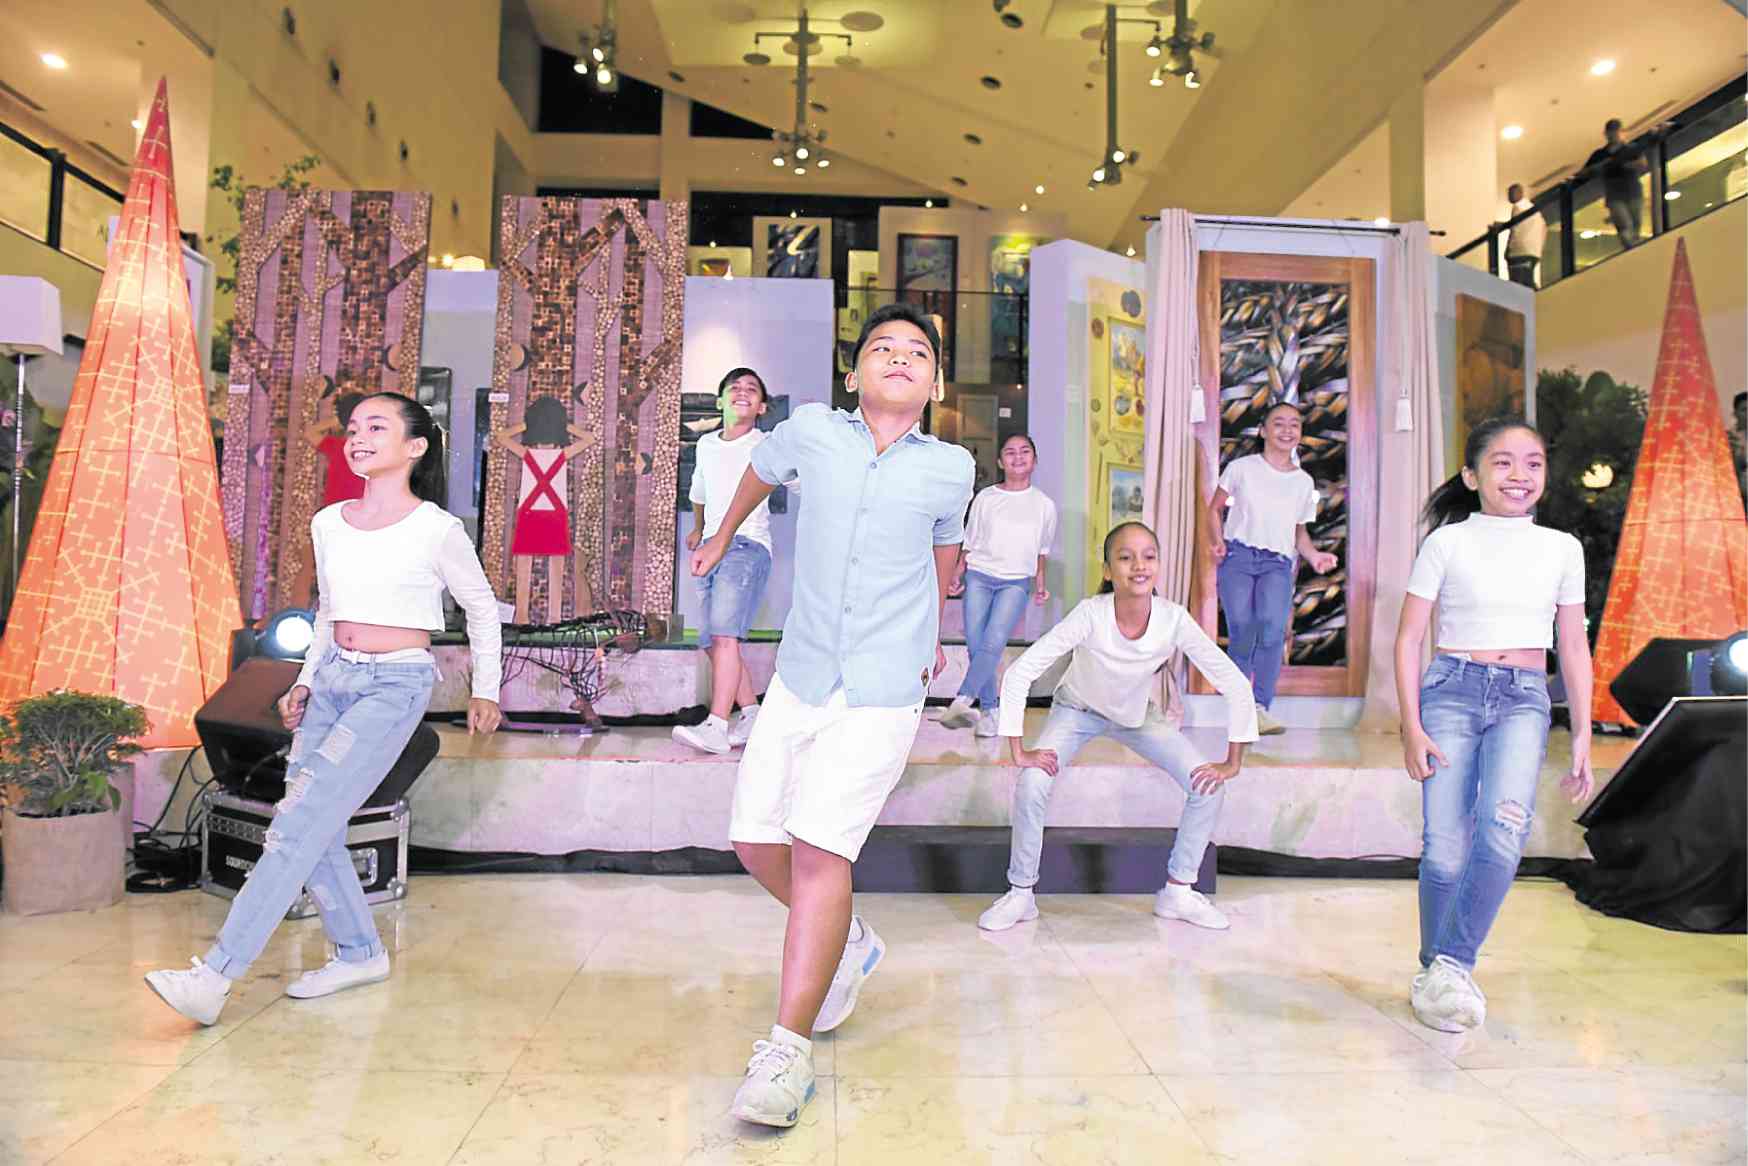 Steps Dance Studio kids perform a dance number from the “Awit at Laro” album.